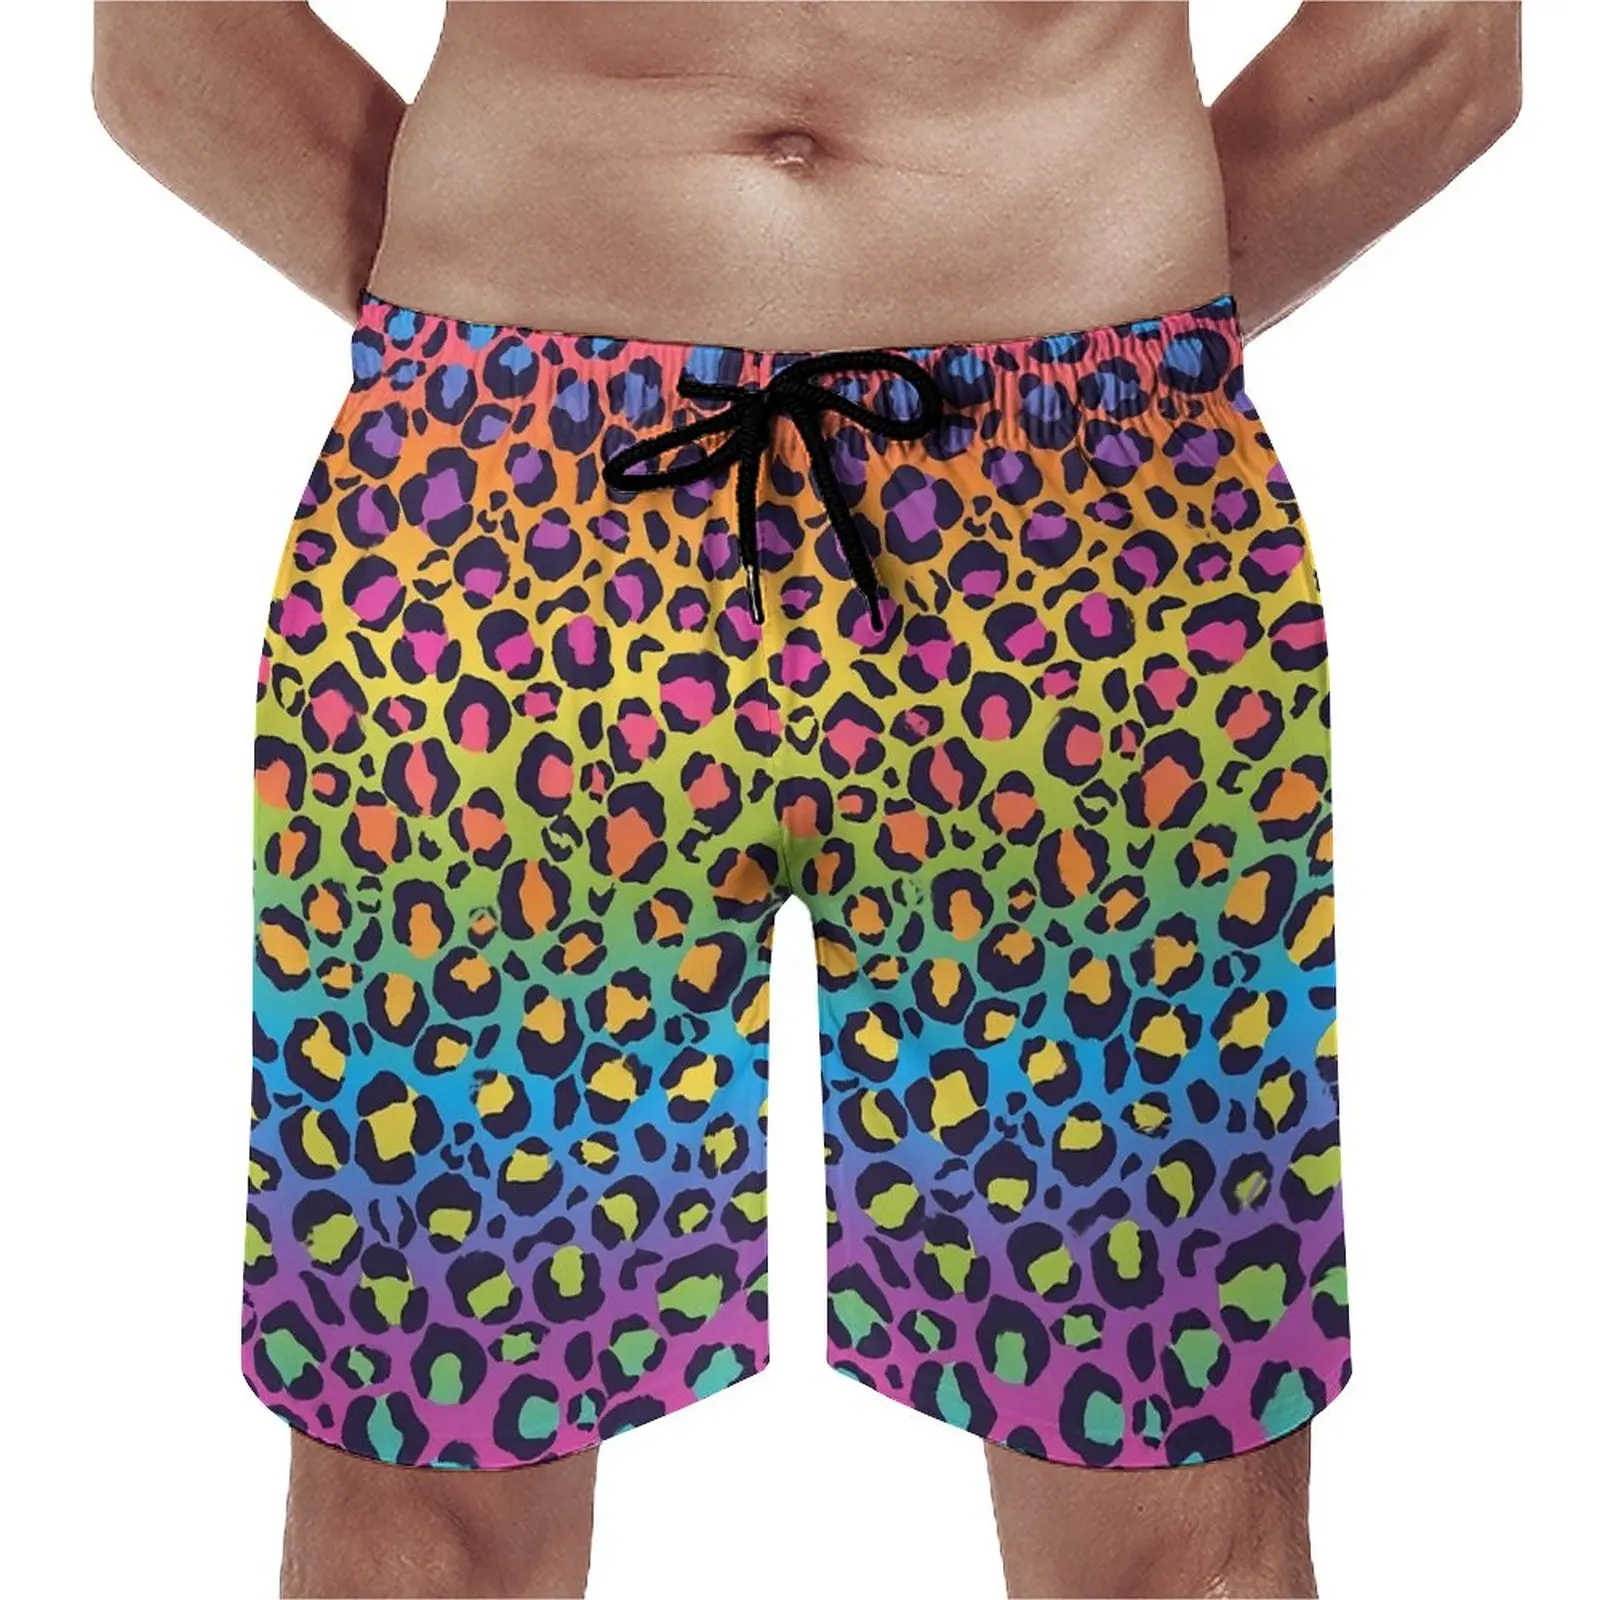 

Rainbow Ombre Board Shorts Summer Leopard Print Running Board Short Pants Men Comfortable Casual Print Plus Size Swimming Trunks